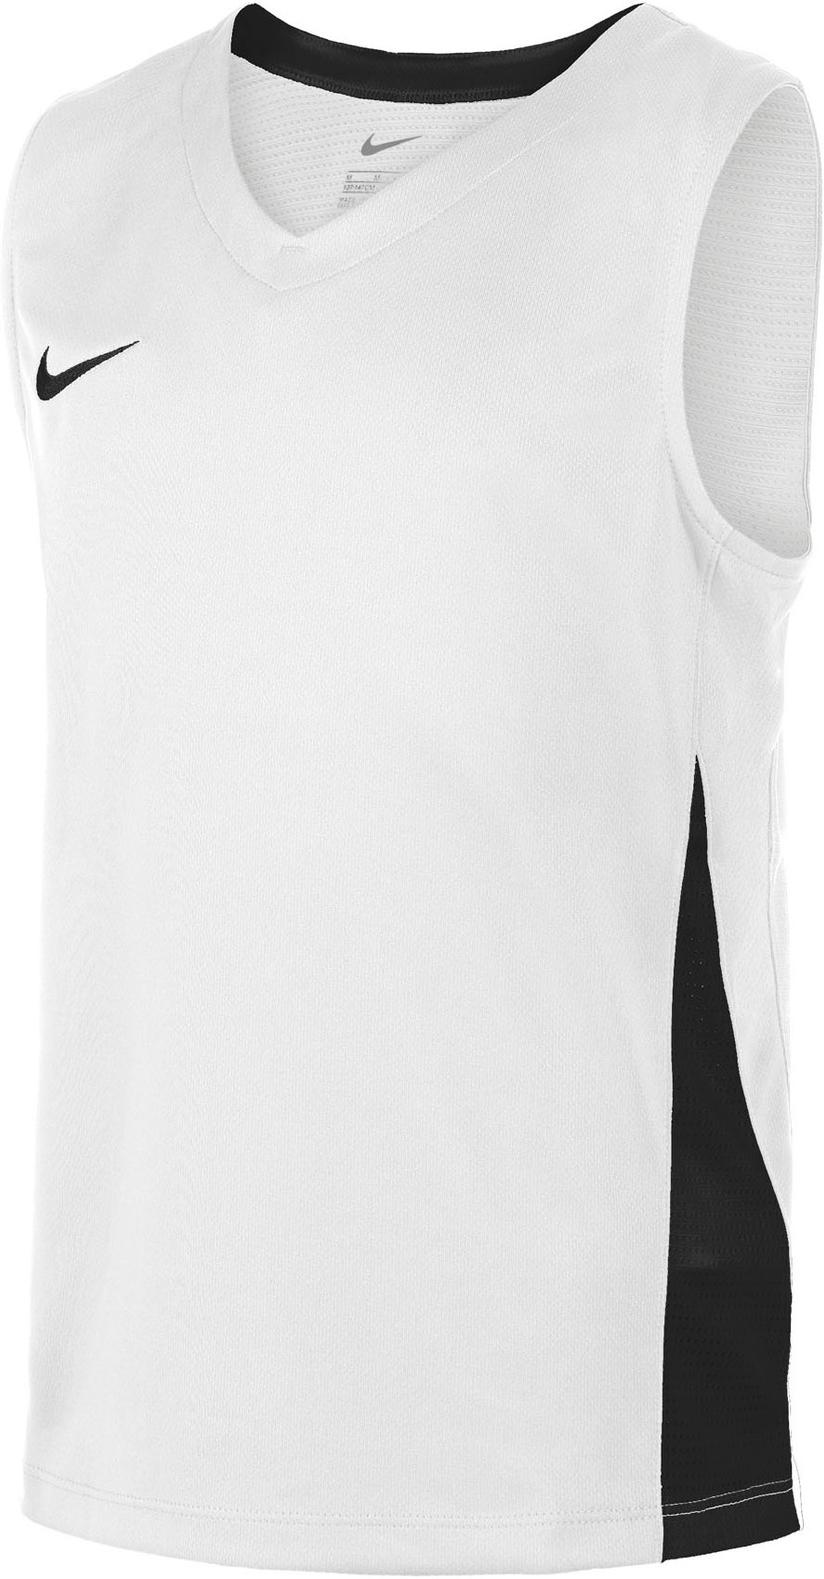 Dres Nike YOUTH TEAM BASKETBALL STOCK JERSEY